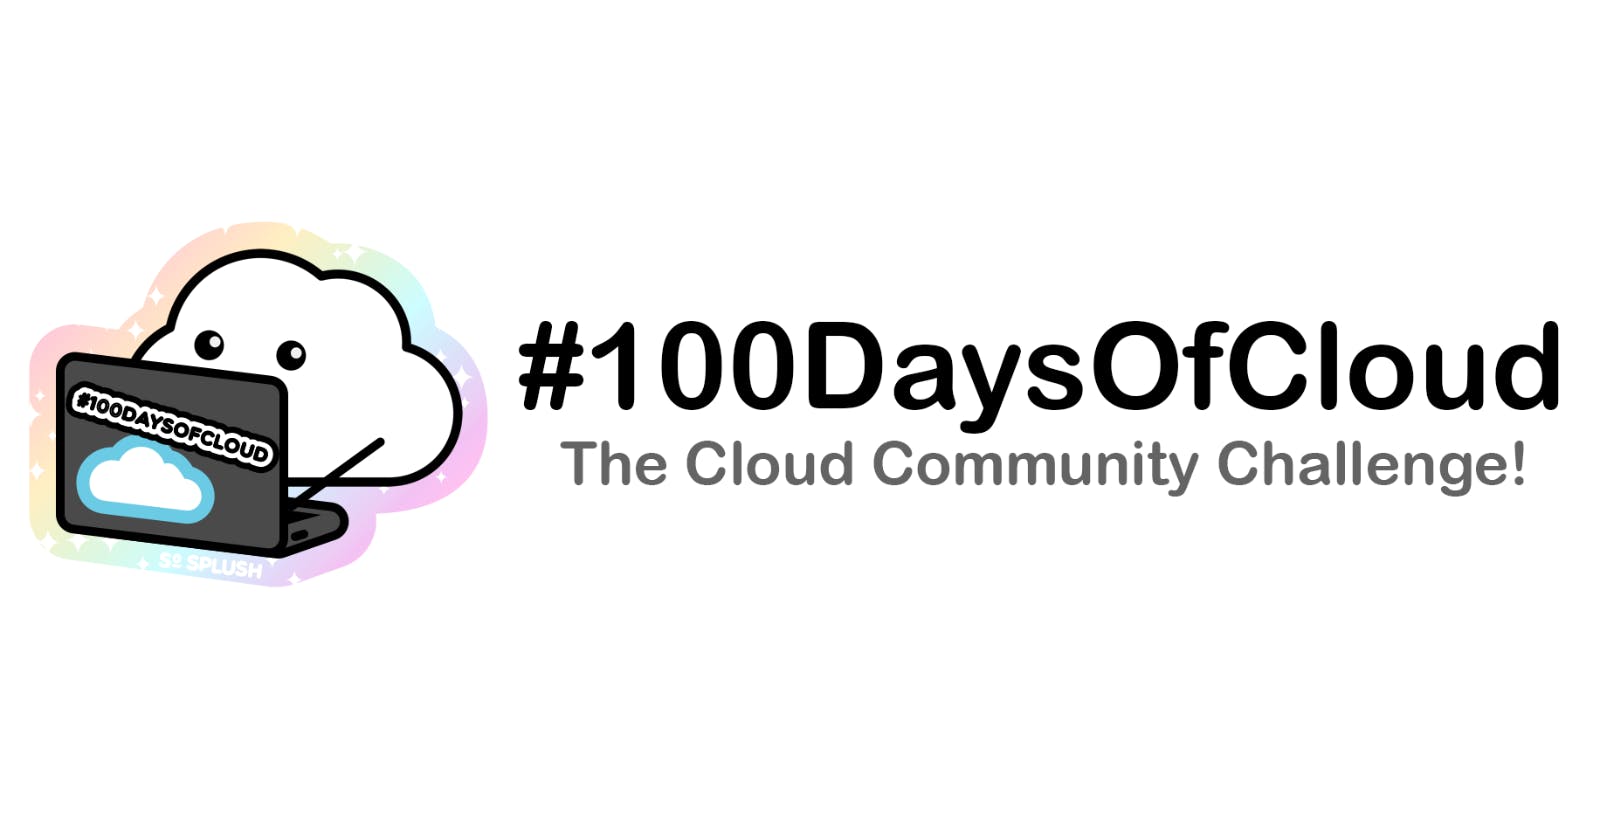 Why I'm starting the #100DaysOfCloud challenge in 2022